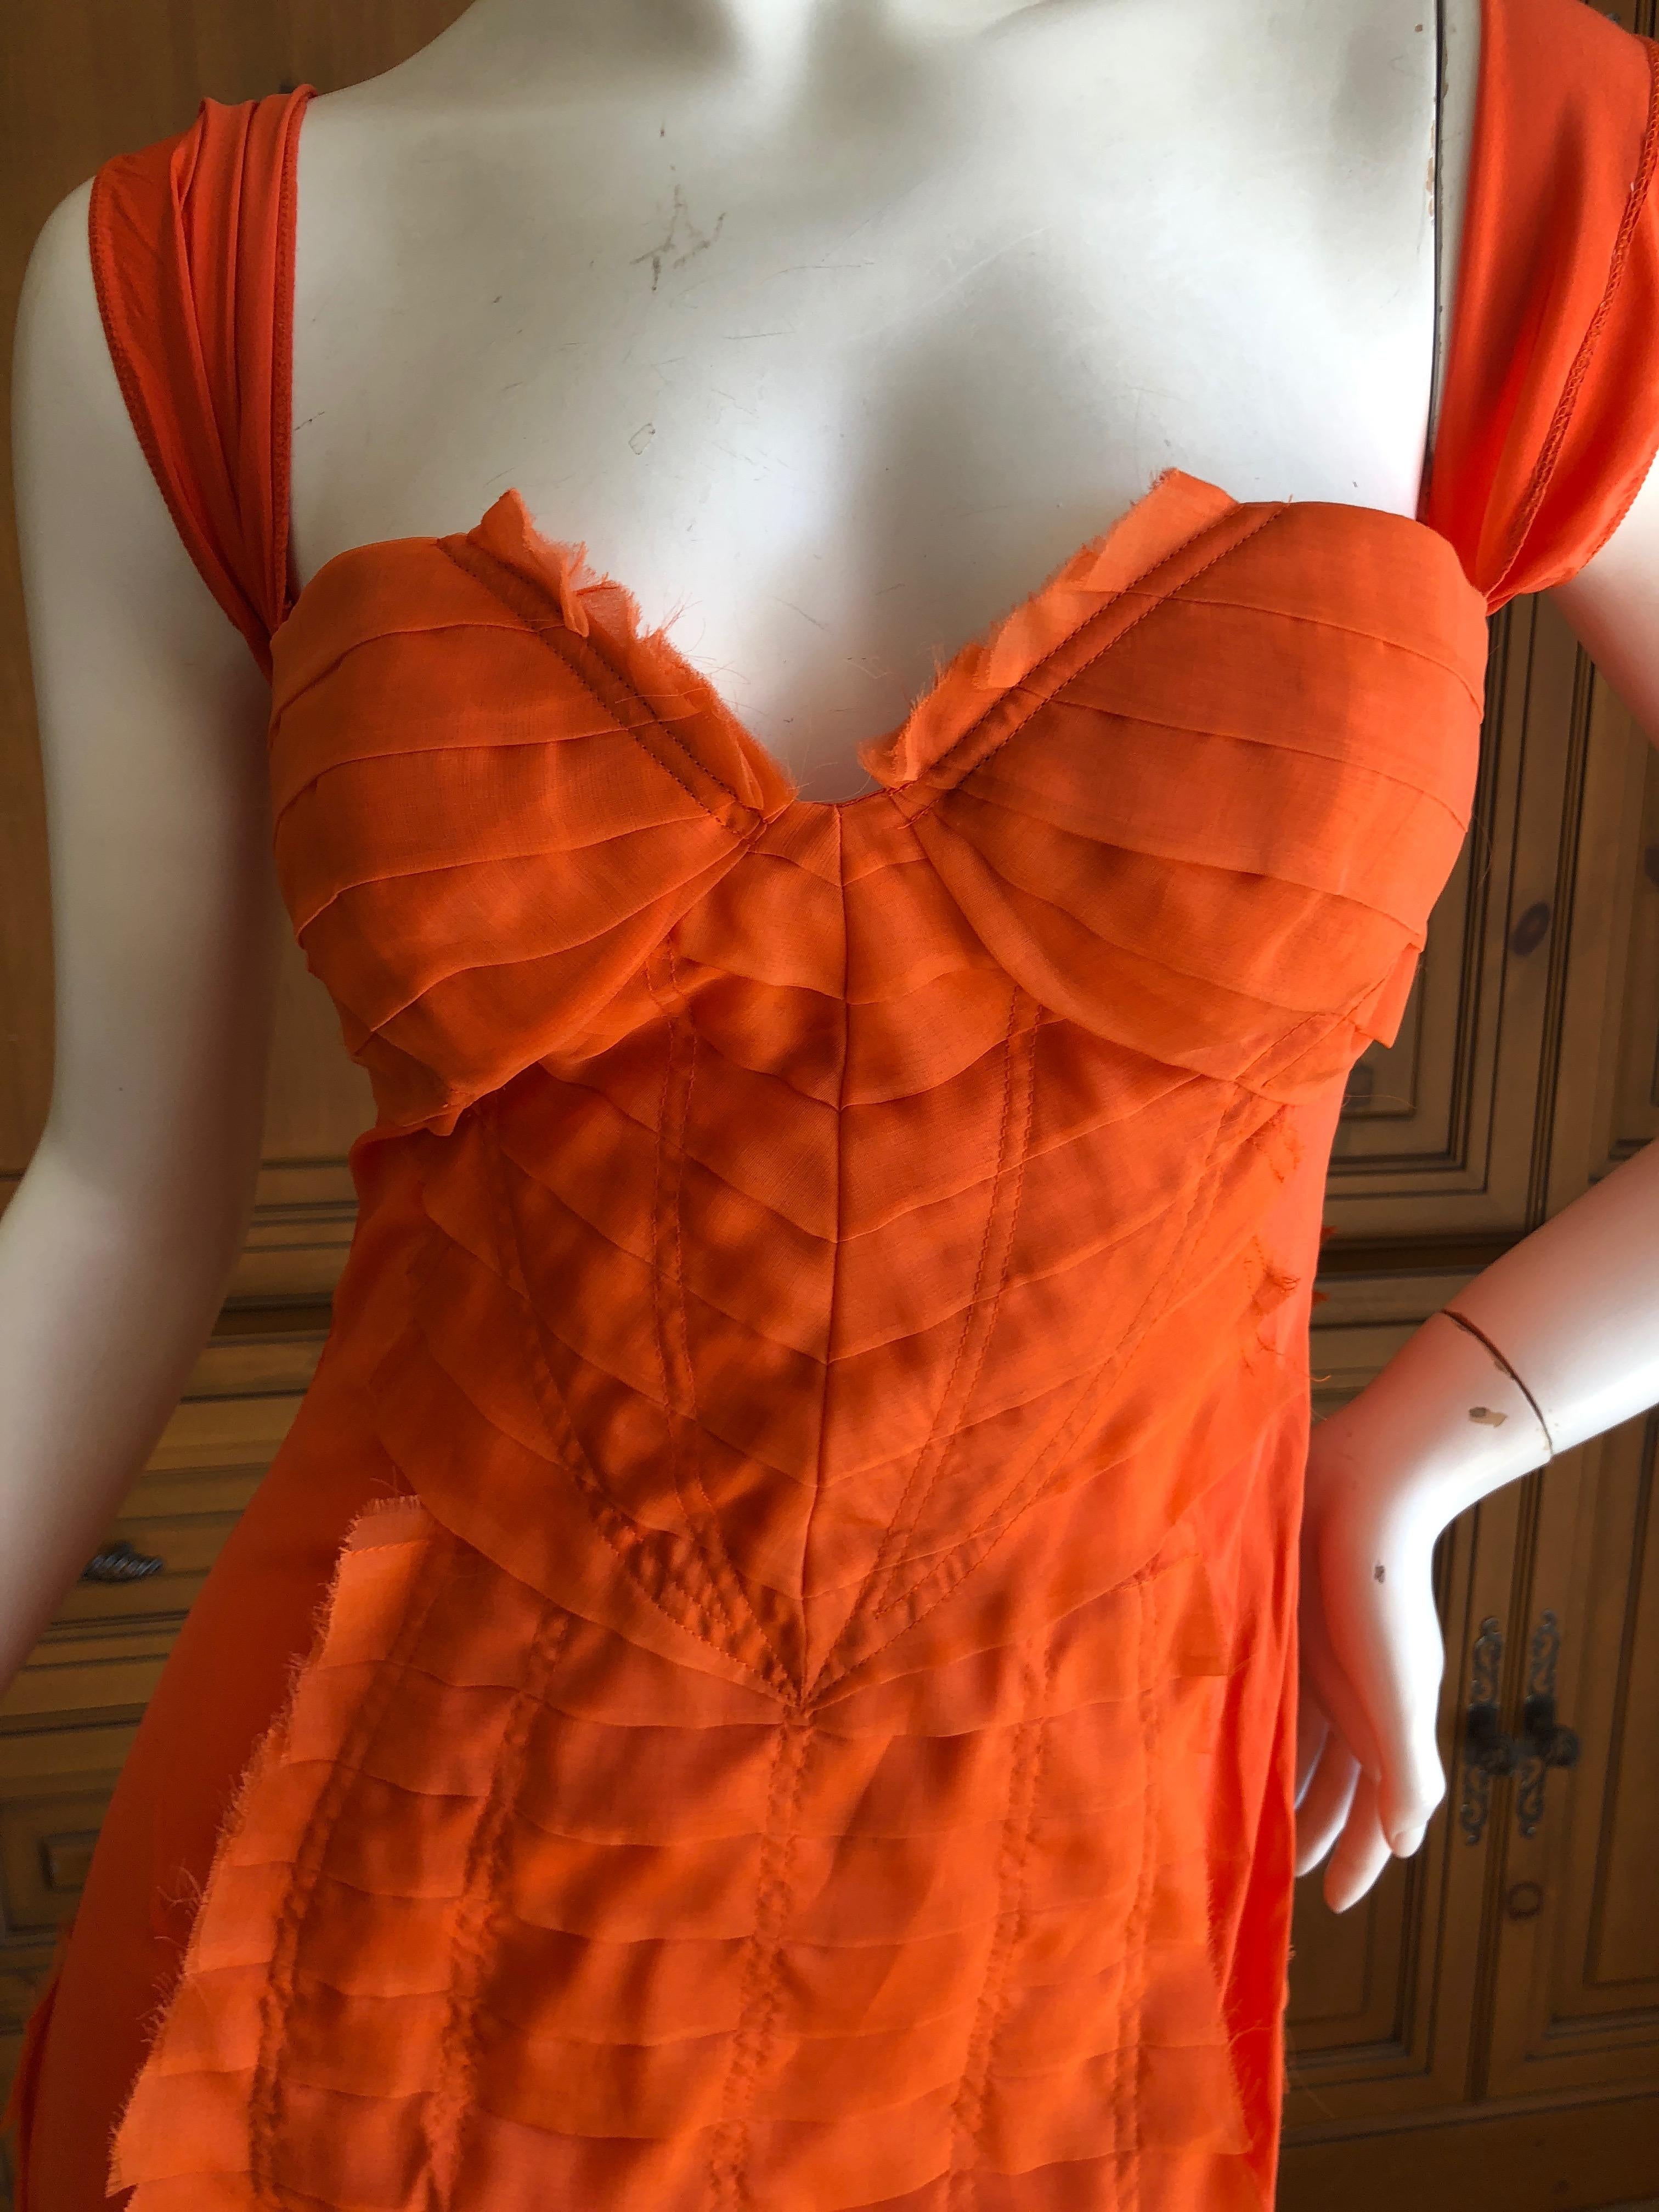 Gucci by Tom Ford 2004 Orange Ribbon Dress Tom Ford Book Piece  In Excellent Condition For Sale In Cloverdale, CA